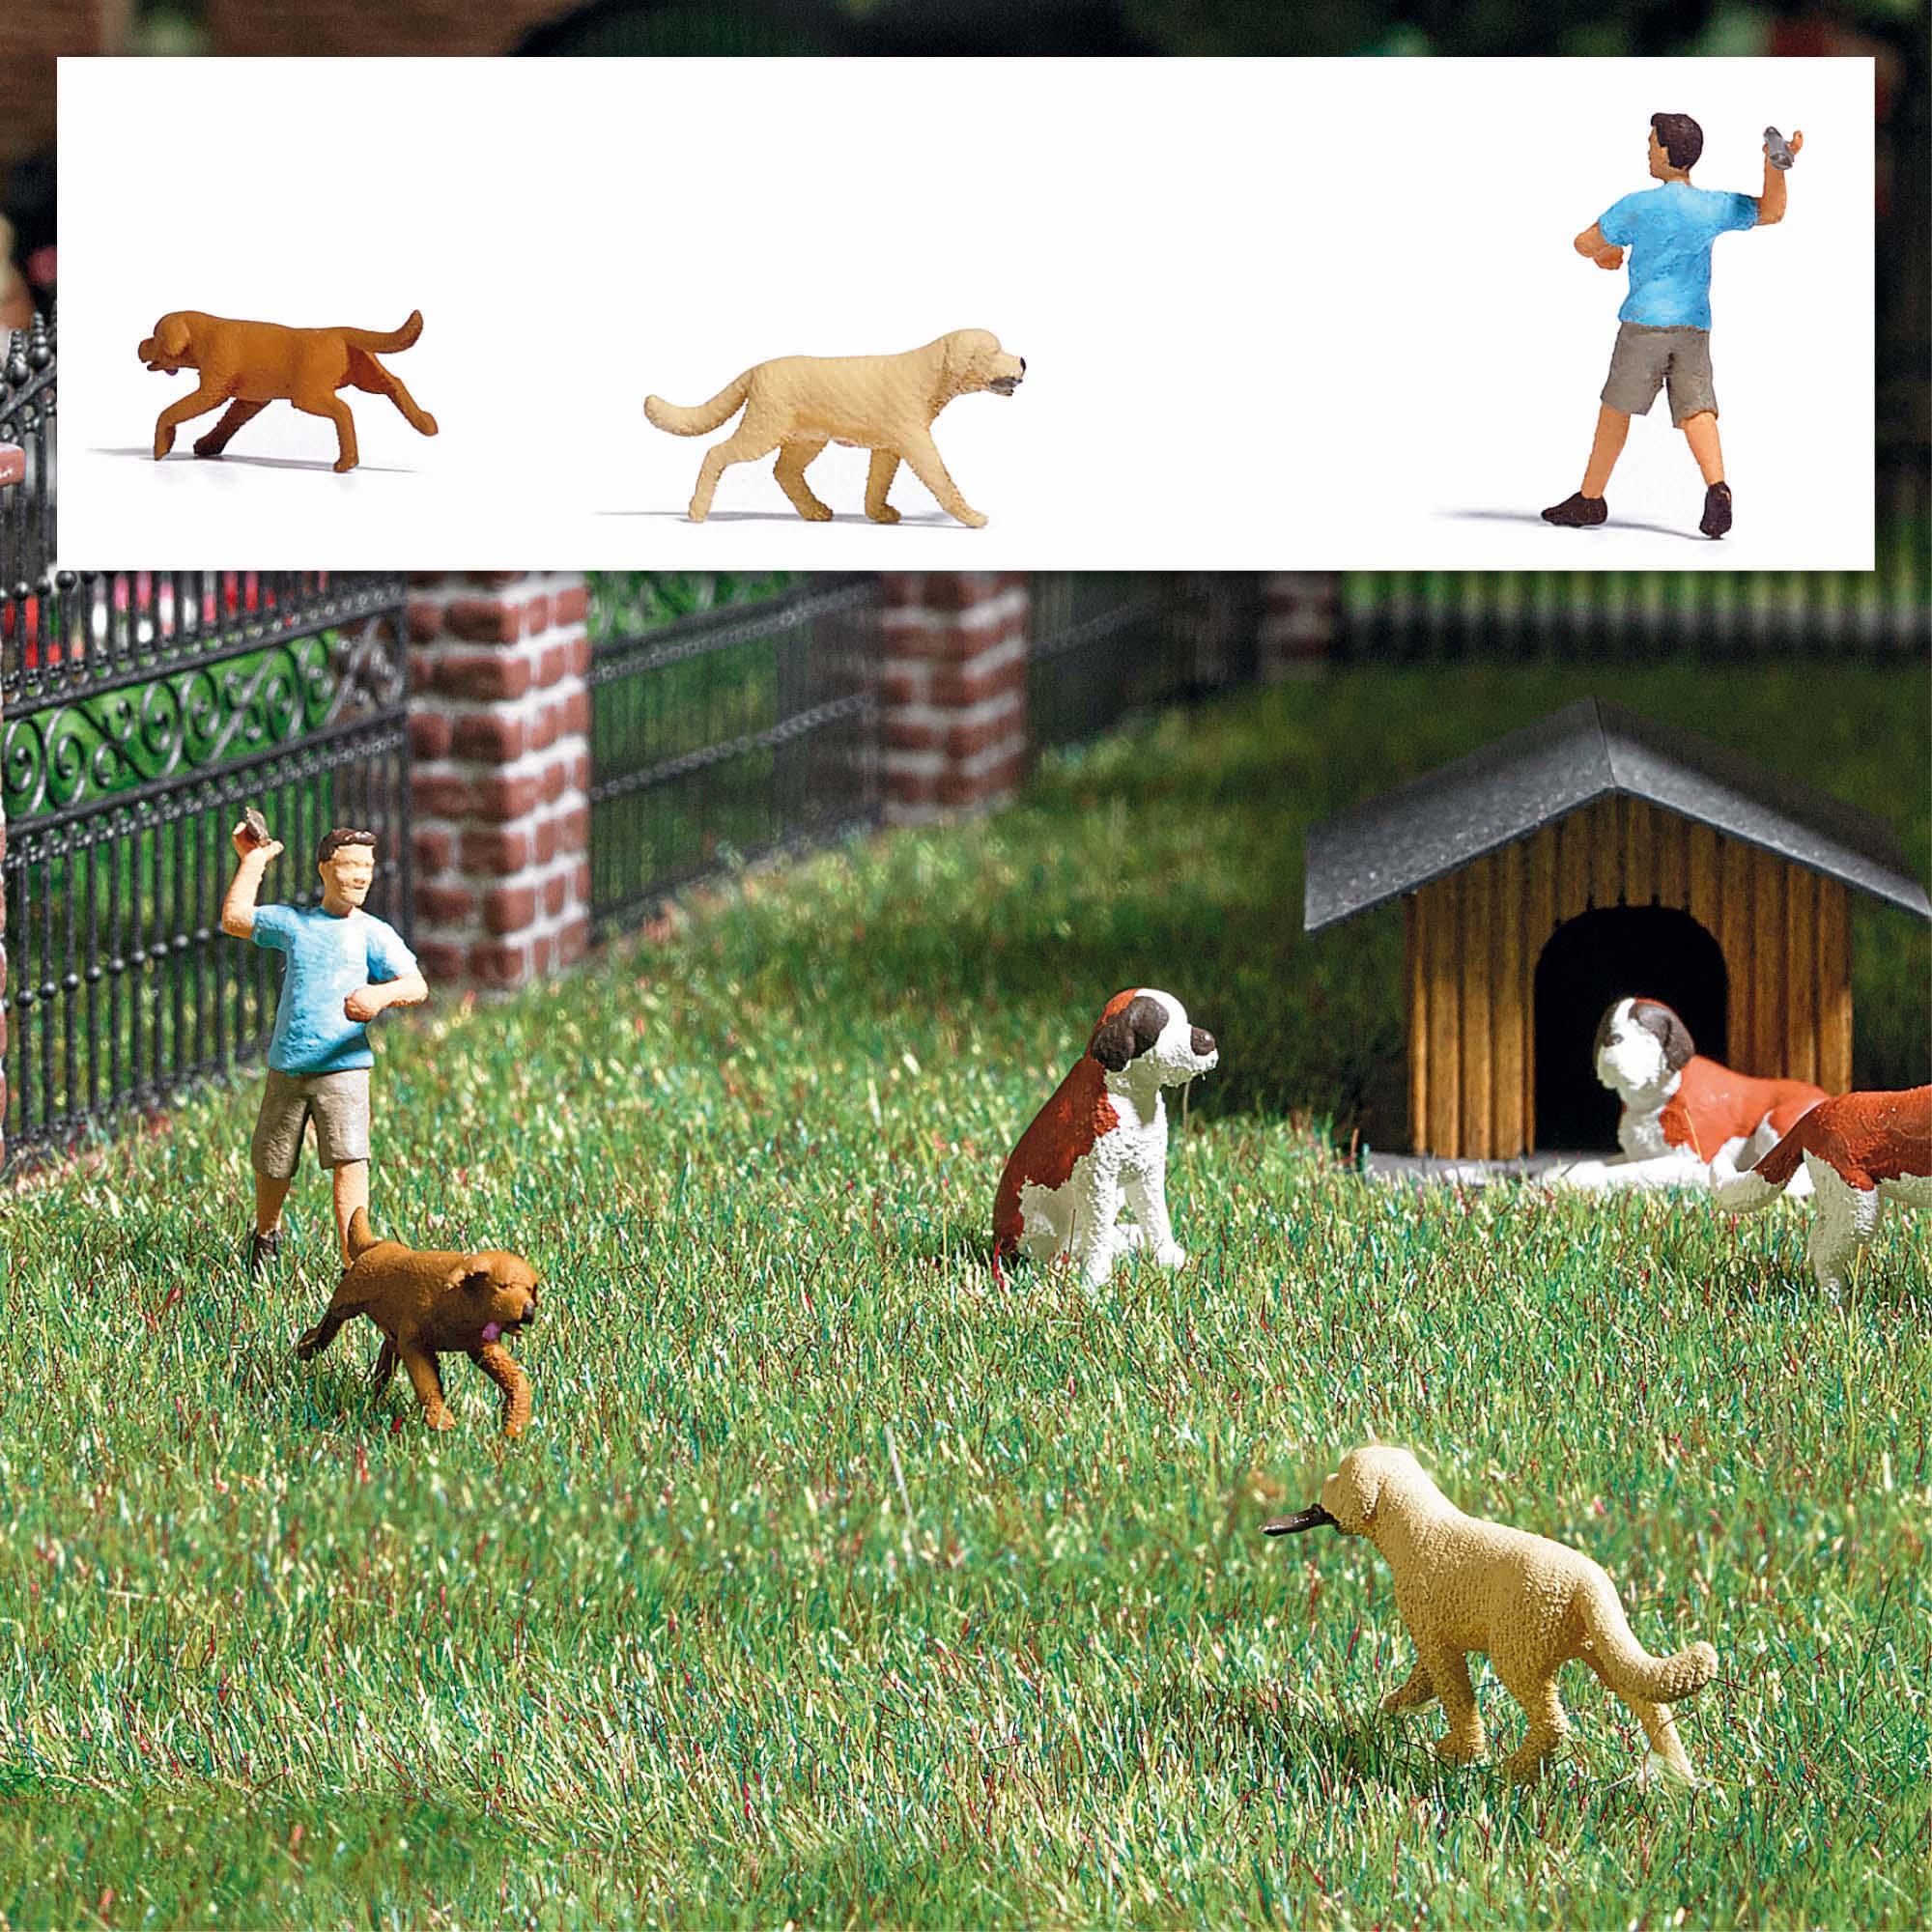 Busch 8858 Retriever game with dogs